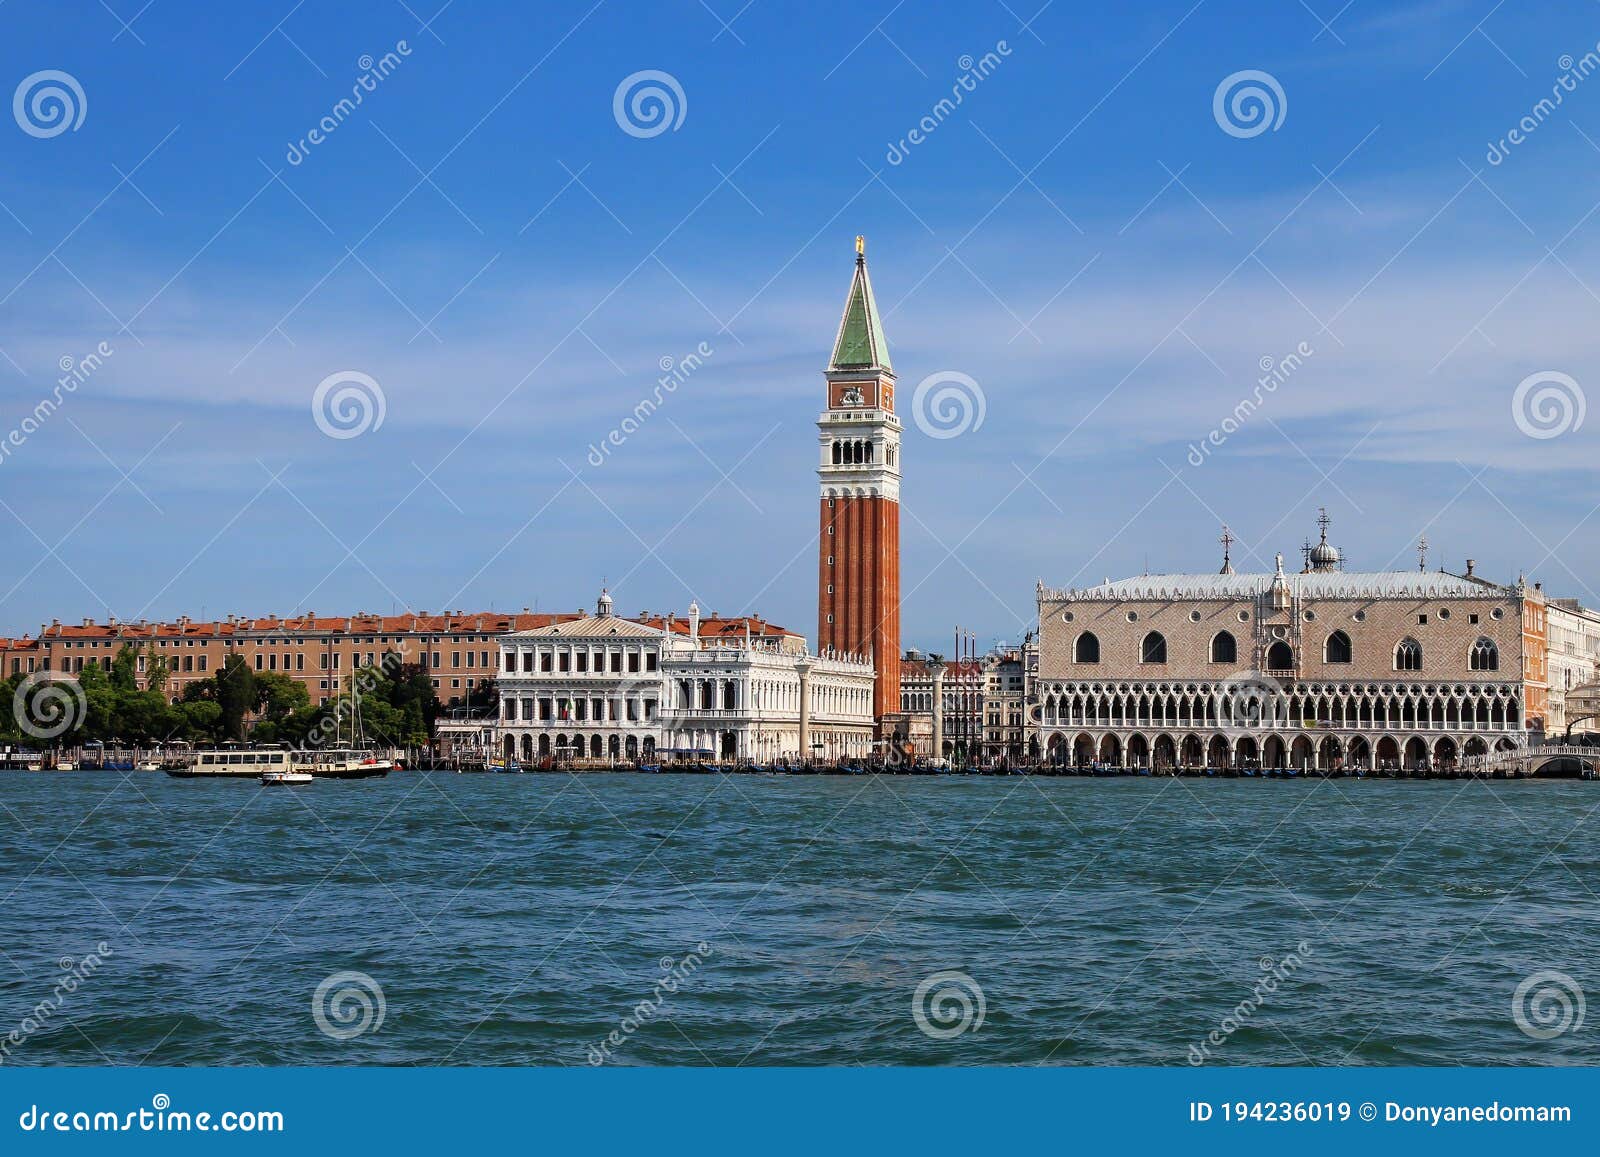 view of piazza san marco with campanile, palazzo ducale and biblioteca in venice, italy